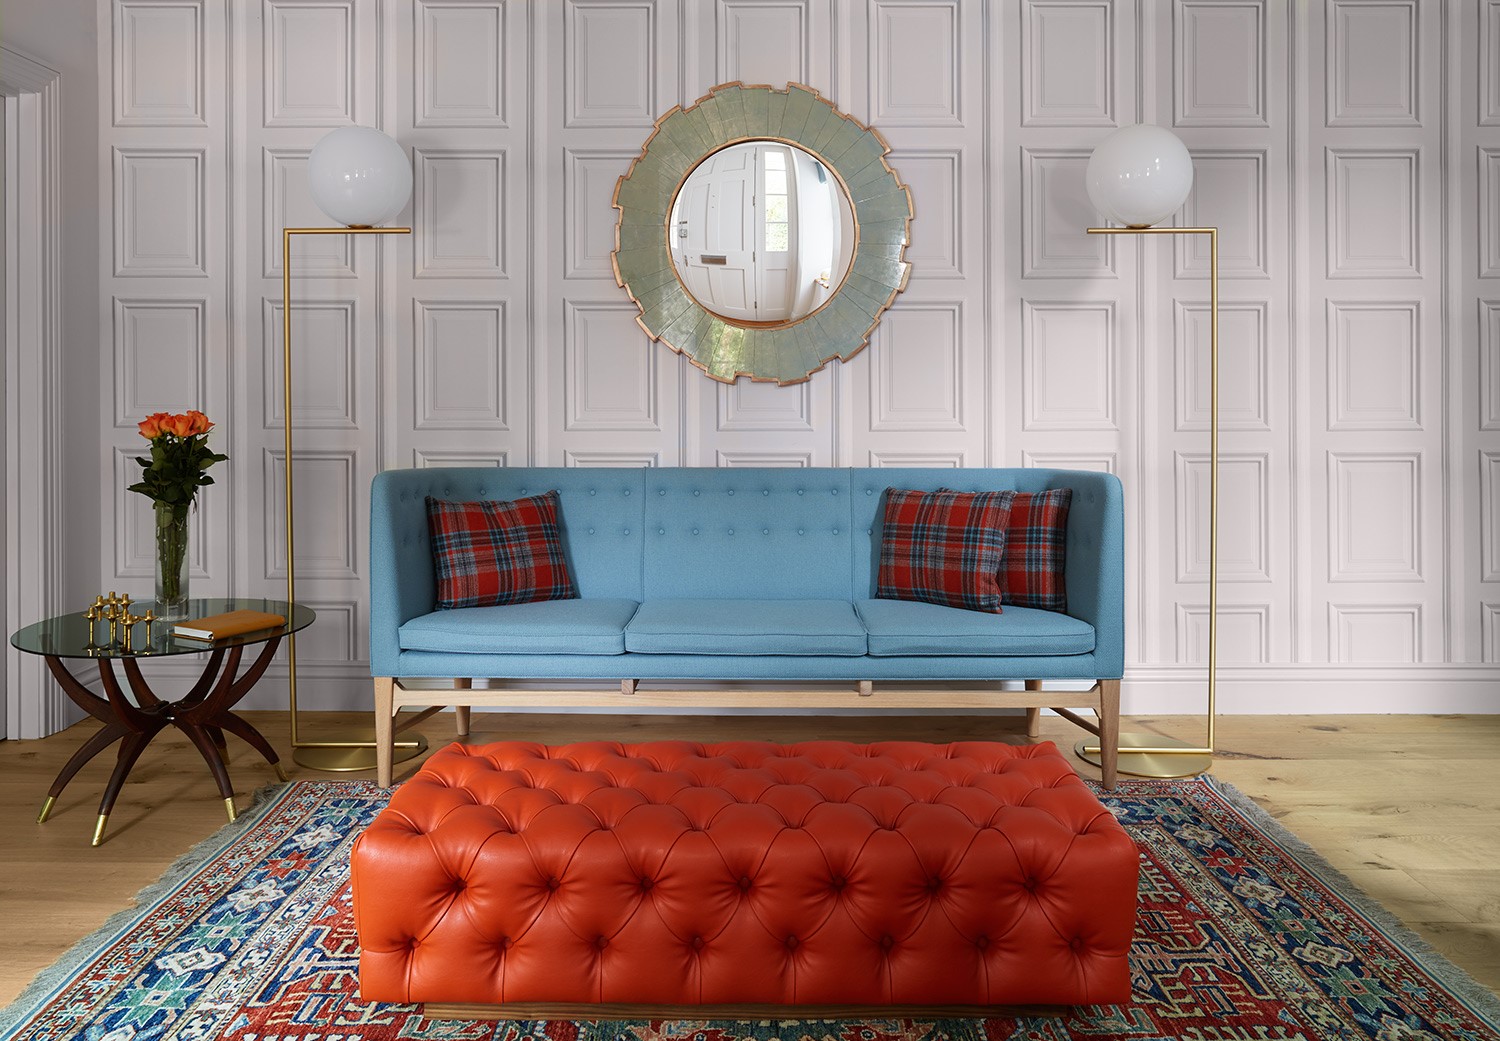 Entrance hall, with blue sofa & feature orange deep buttoned footstool; feature panelling wall paper and design classic lighting.